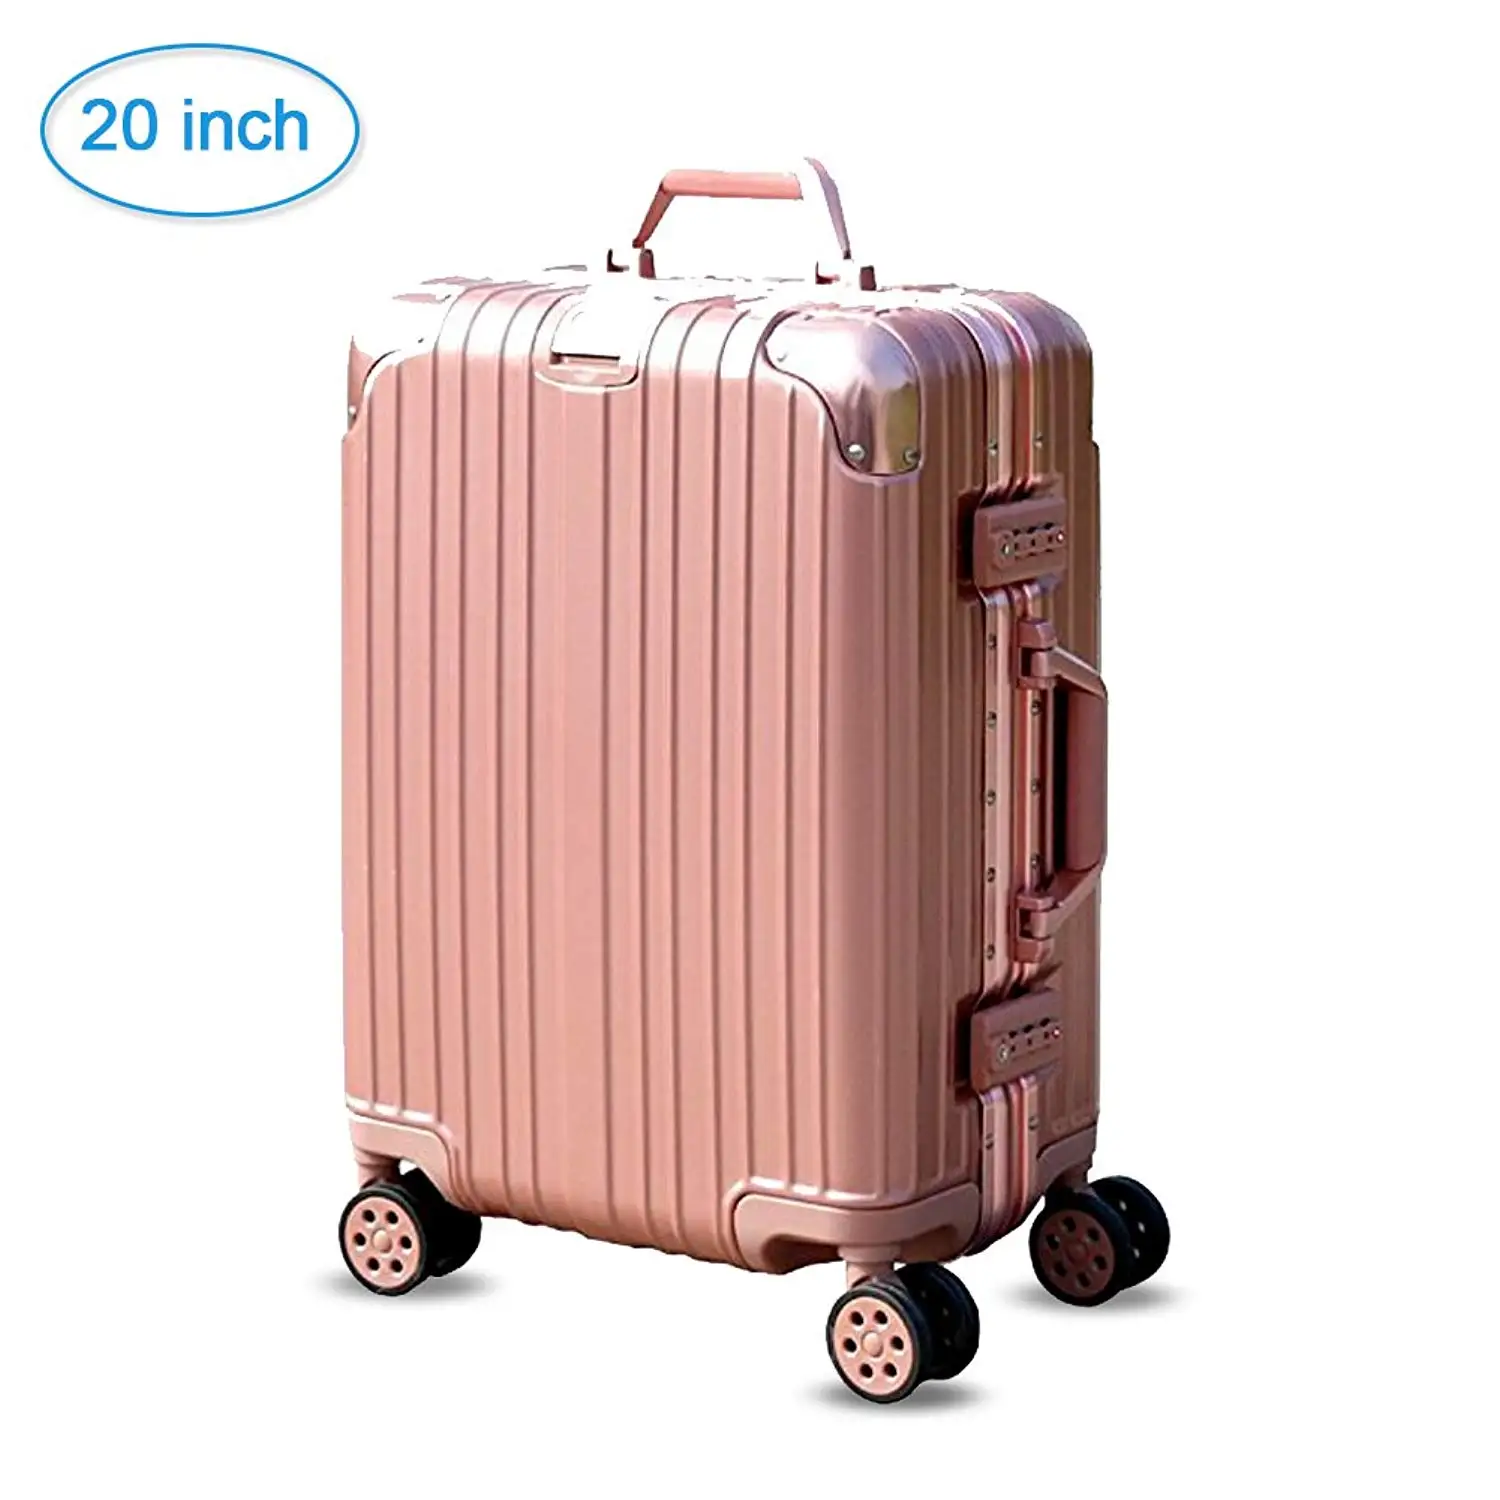 Cheap Lightweight Spinner Carry On Luggage Reviews, find Lightweight ...